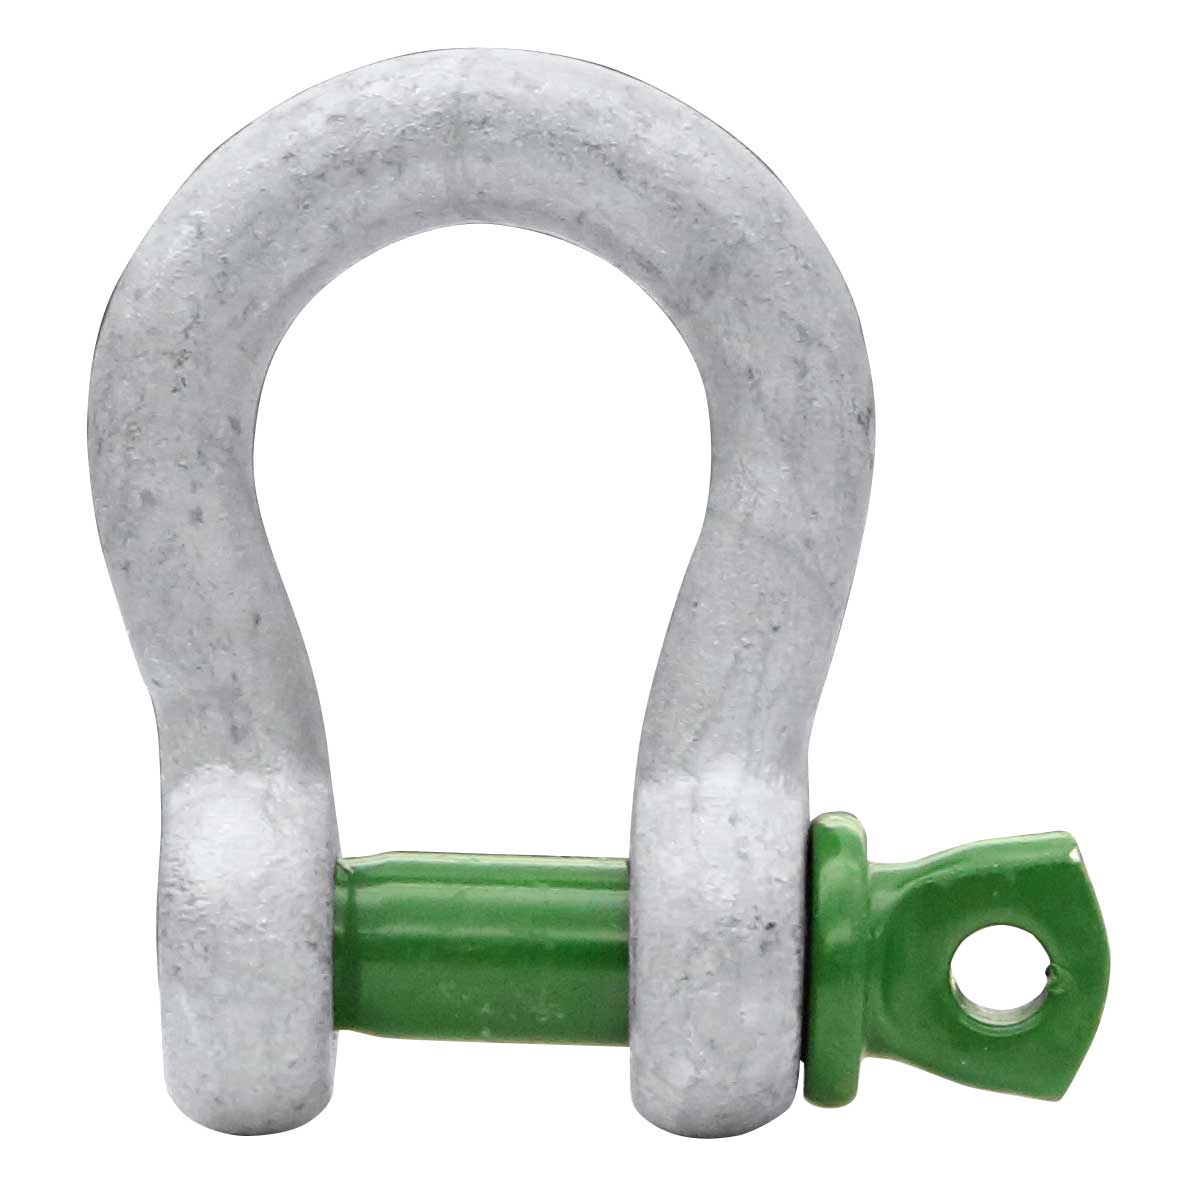 7/16" Van Beest Green Pin® Screw Pin Anchor Shackle | G-4161 - 1.5 Ton primary image